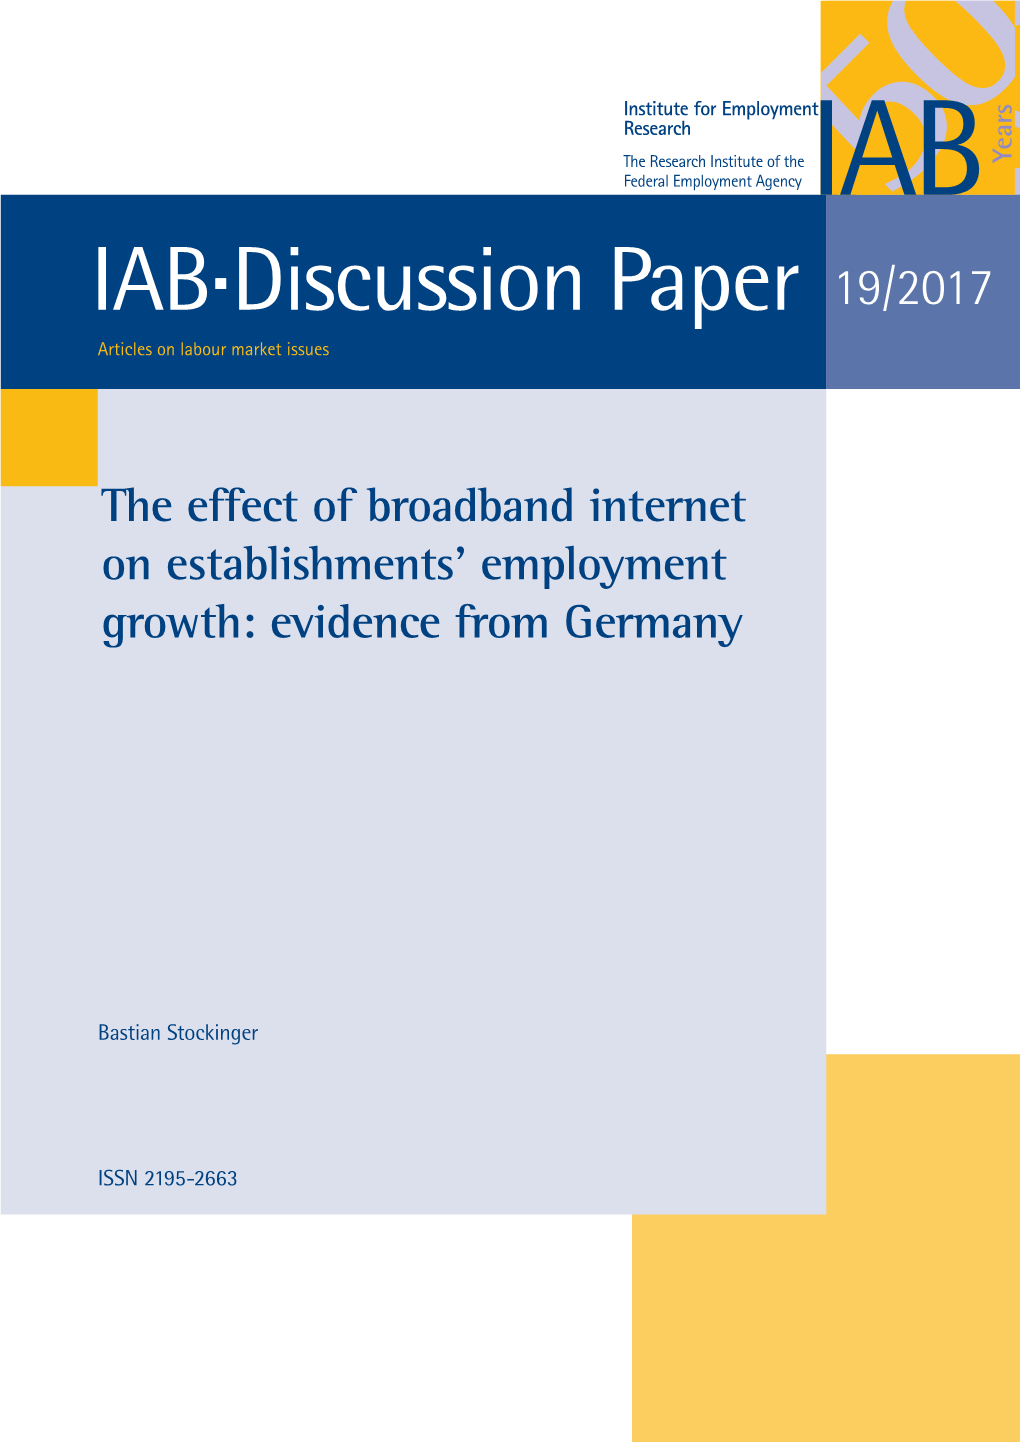 The Effect of Broadband Internet on Establishments’ Employment Growth: Evidence from Germany